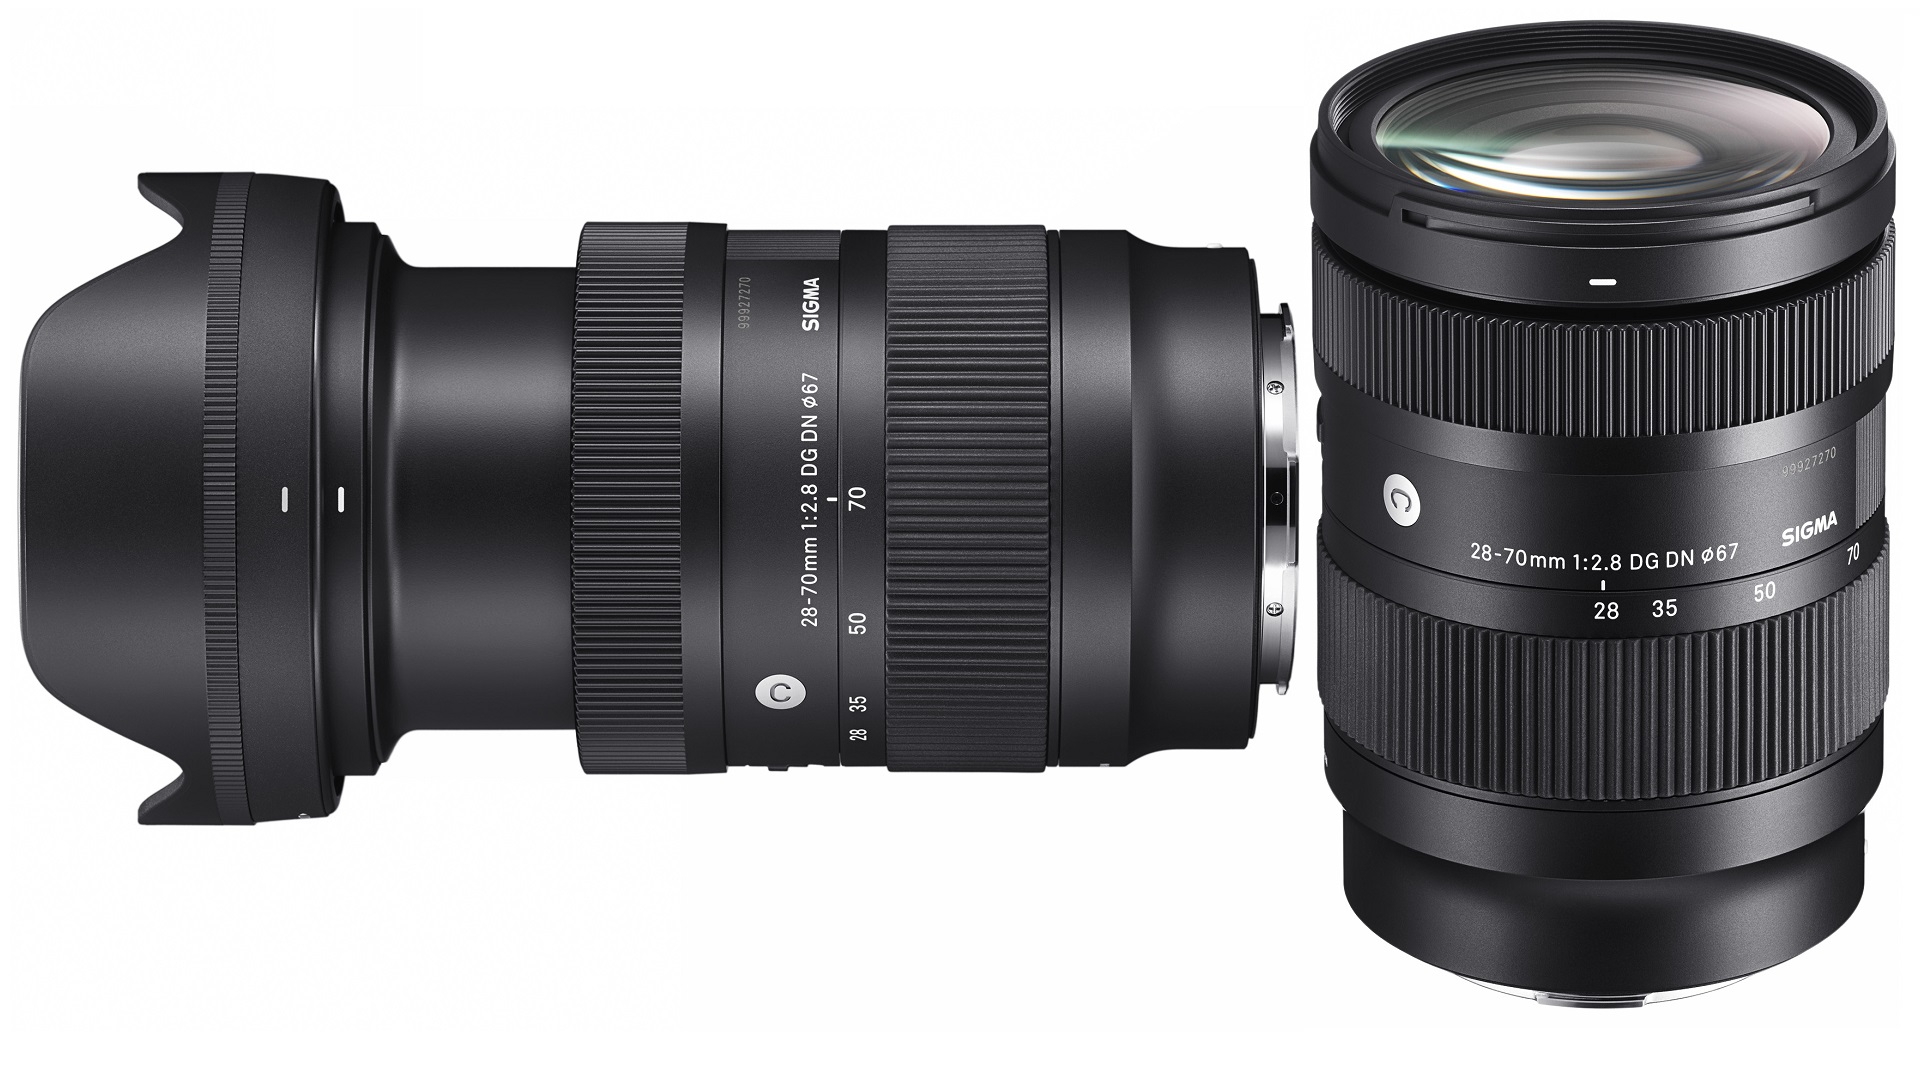 SIGMA 28-70mm F2.8 DG DN Contemporary Zoom Lens Announced | CineD